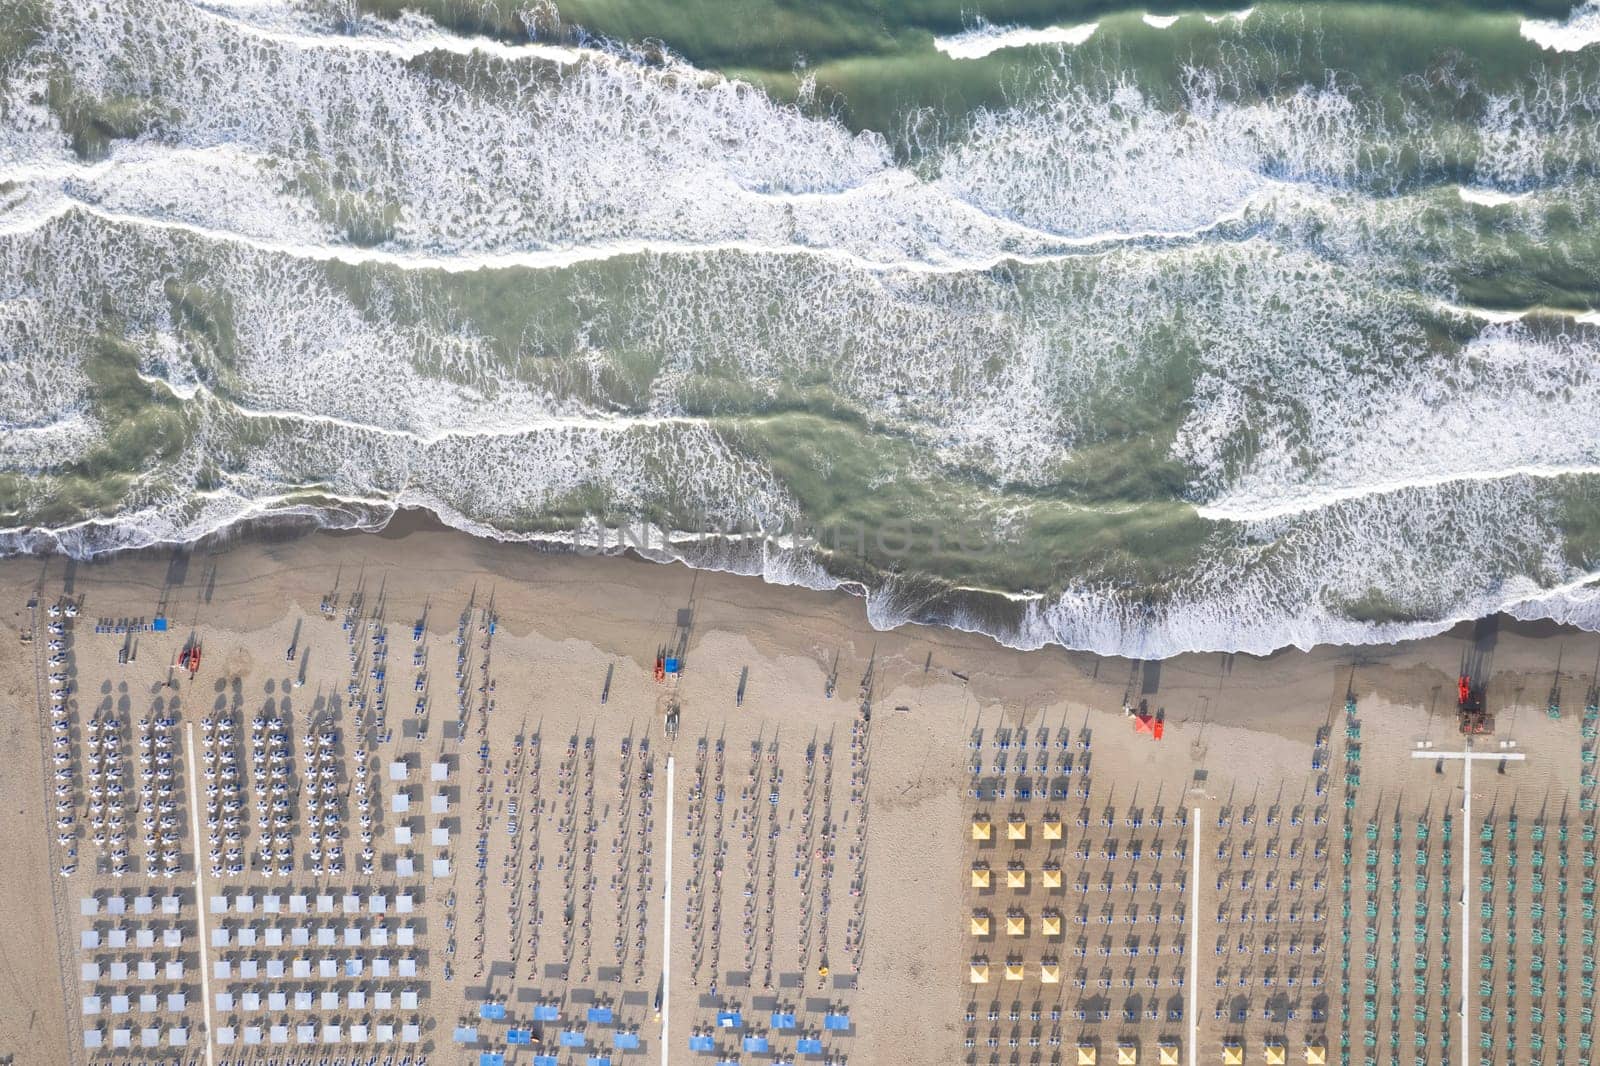 The equipped beach of Versilia seen from above  by fotografiche.eu